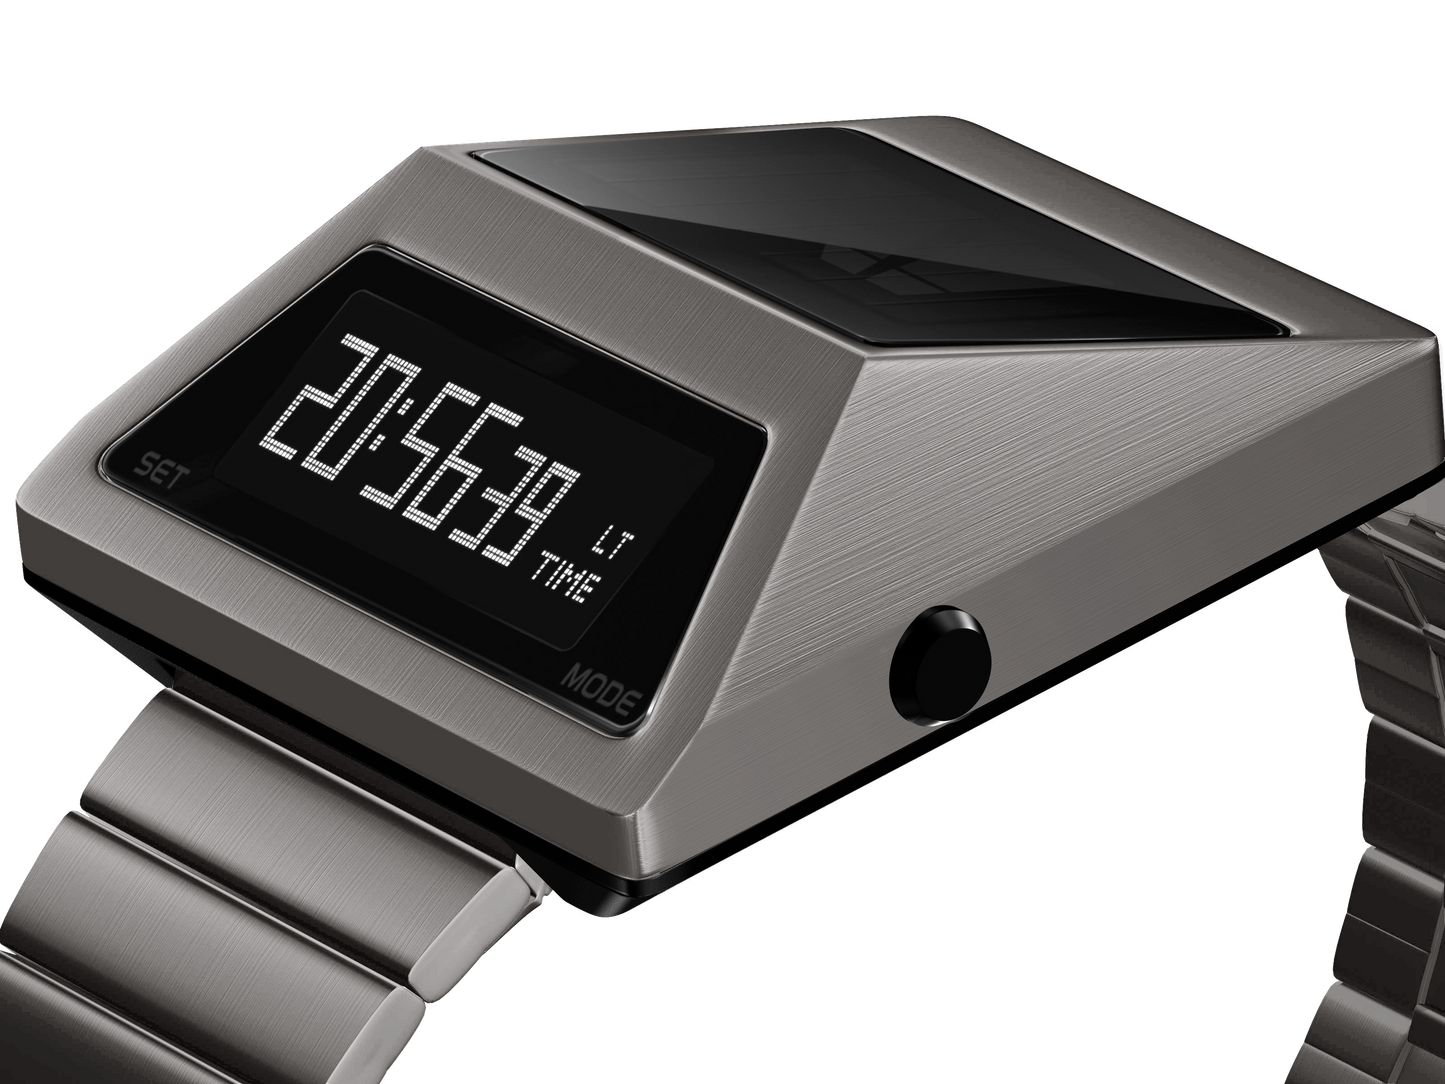 solar-powered-cyber-watches-s3000Ga-W-side-view